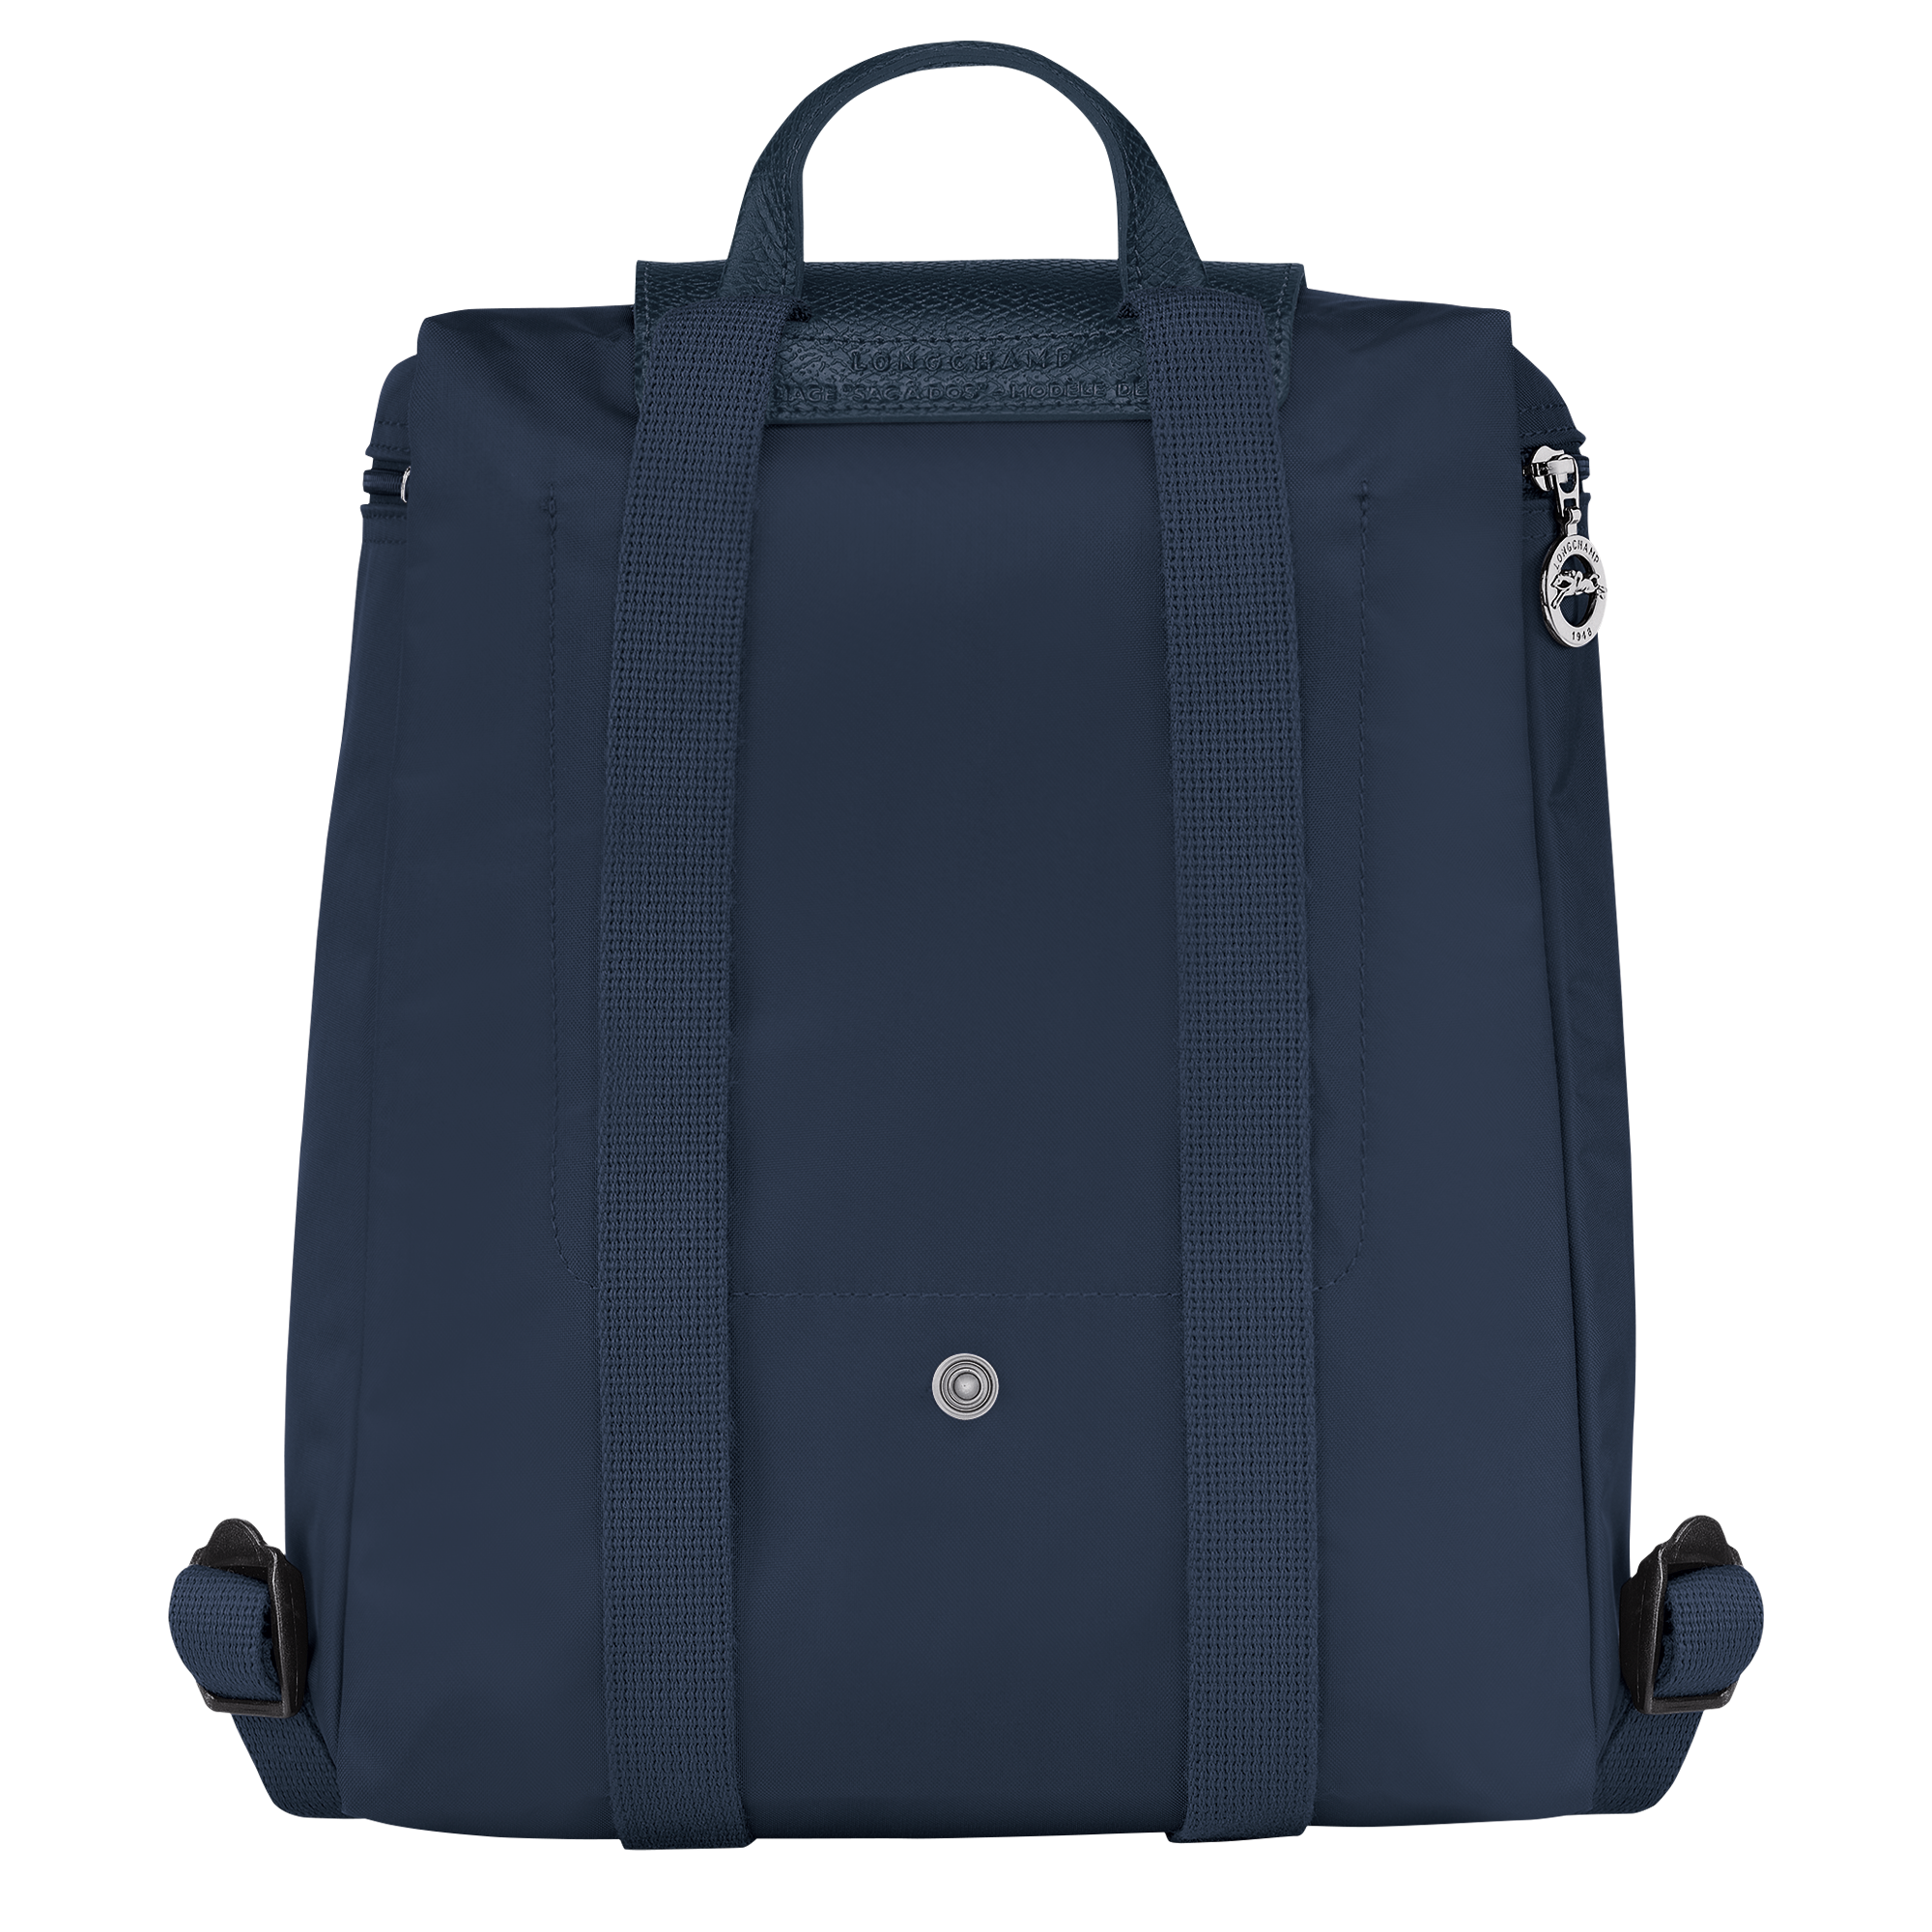 Le Pliage Green Backpack, Navy